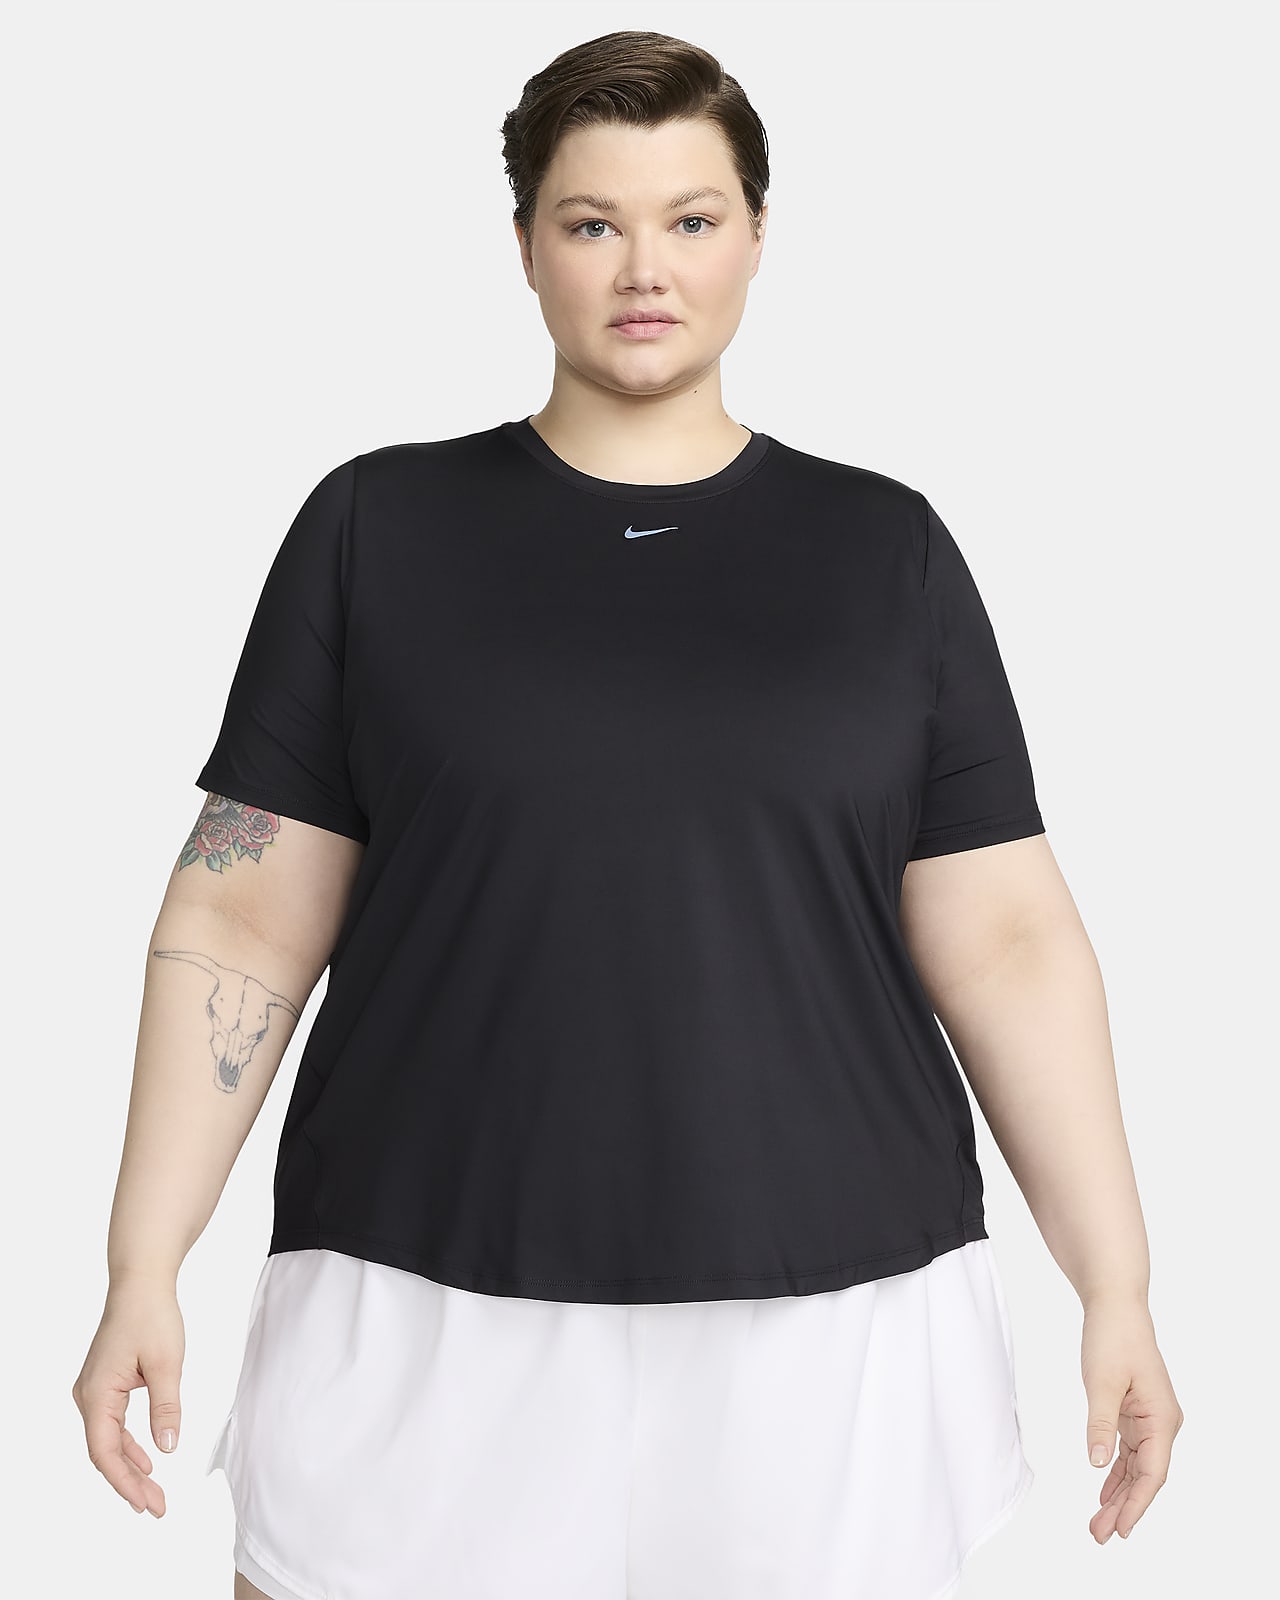 Nike One Fitted Women's Dri-FIT Short-Sleeve Cropped Top. Nike LU